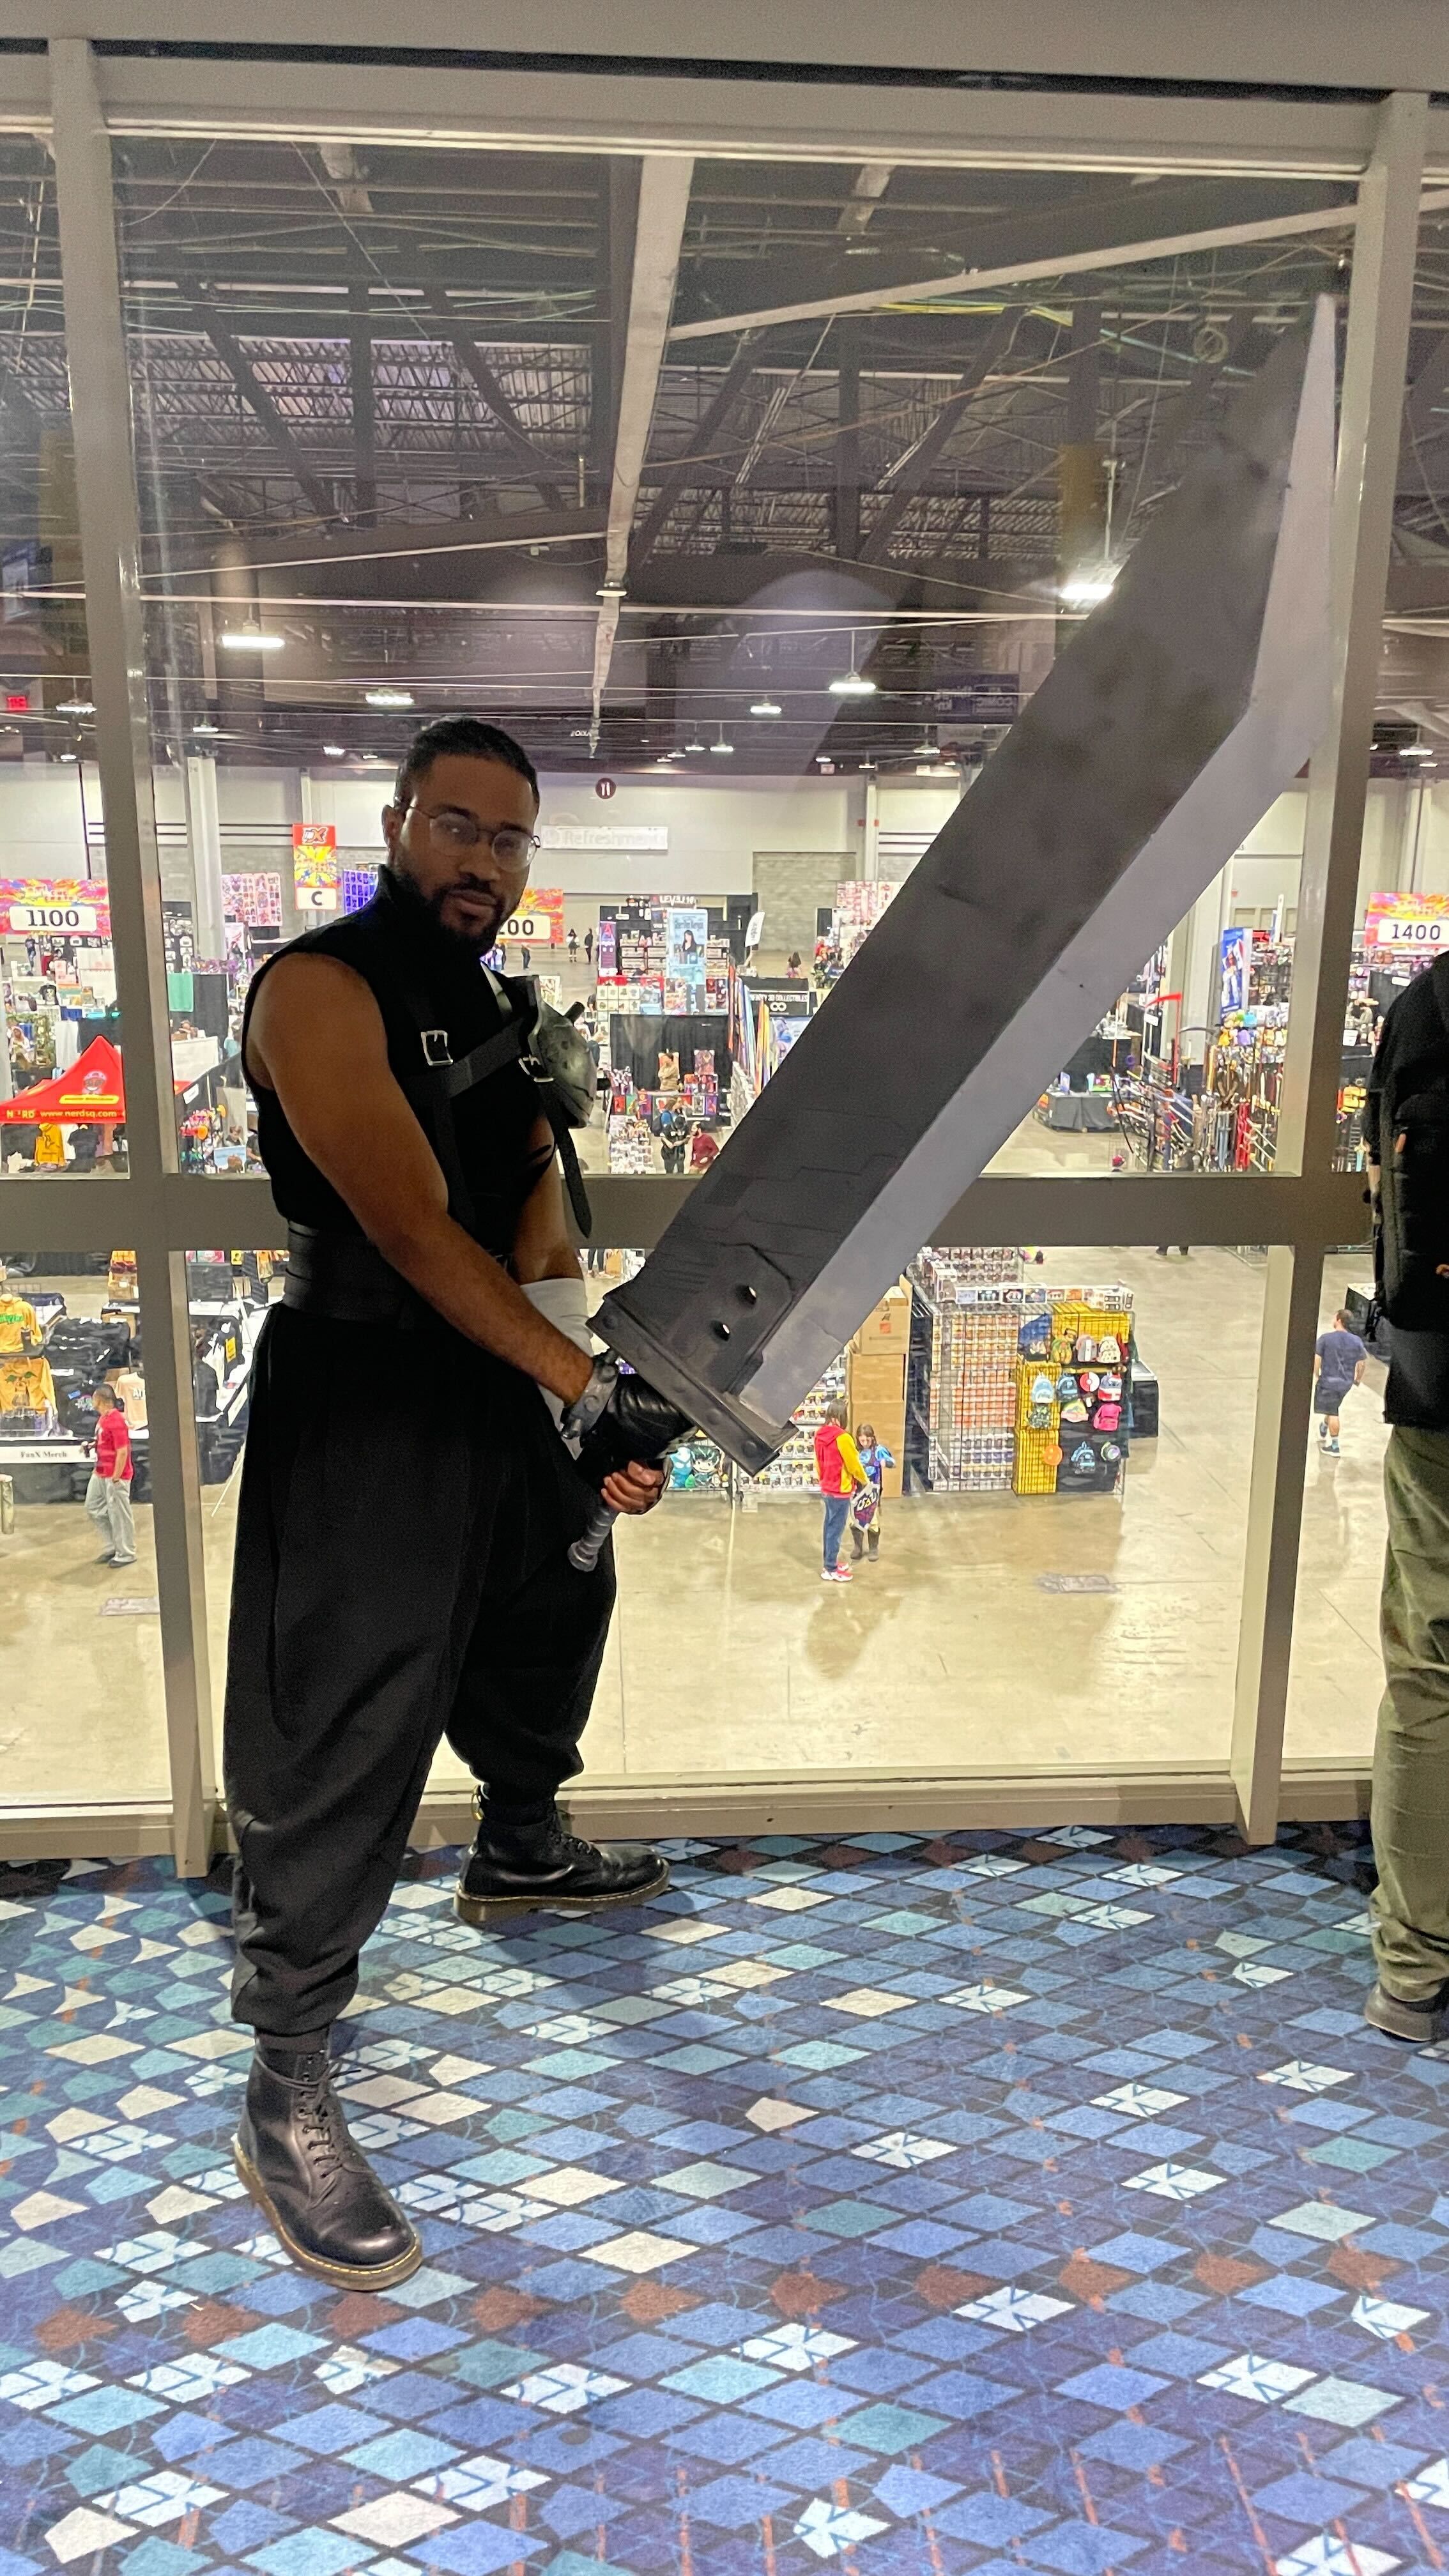 @Igbokage's "Final "Fantasy" cosplay of the game protagonist Cloud Strife. He 3D printed the character's large buster sword within a week.